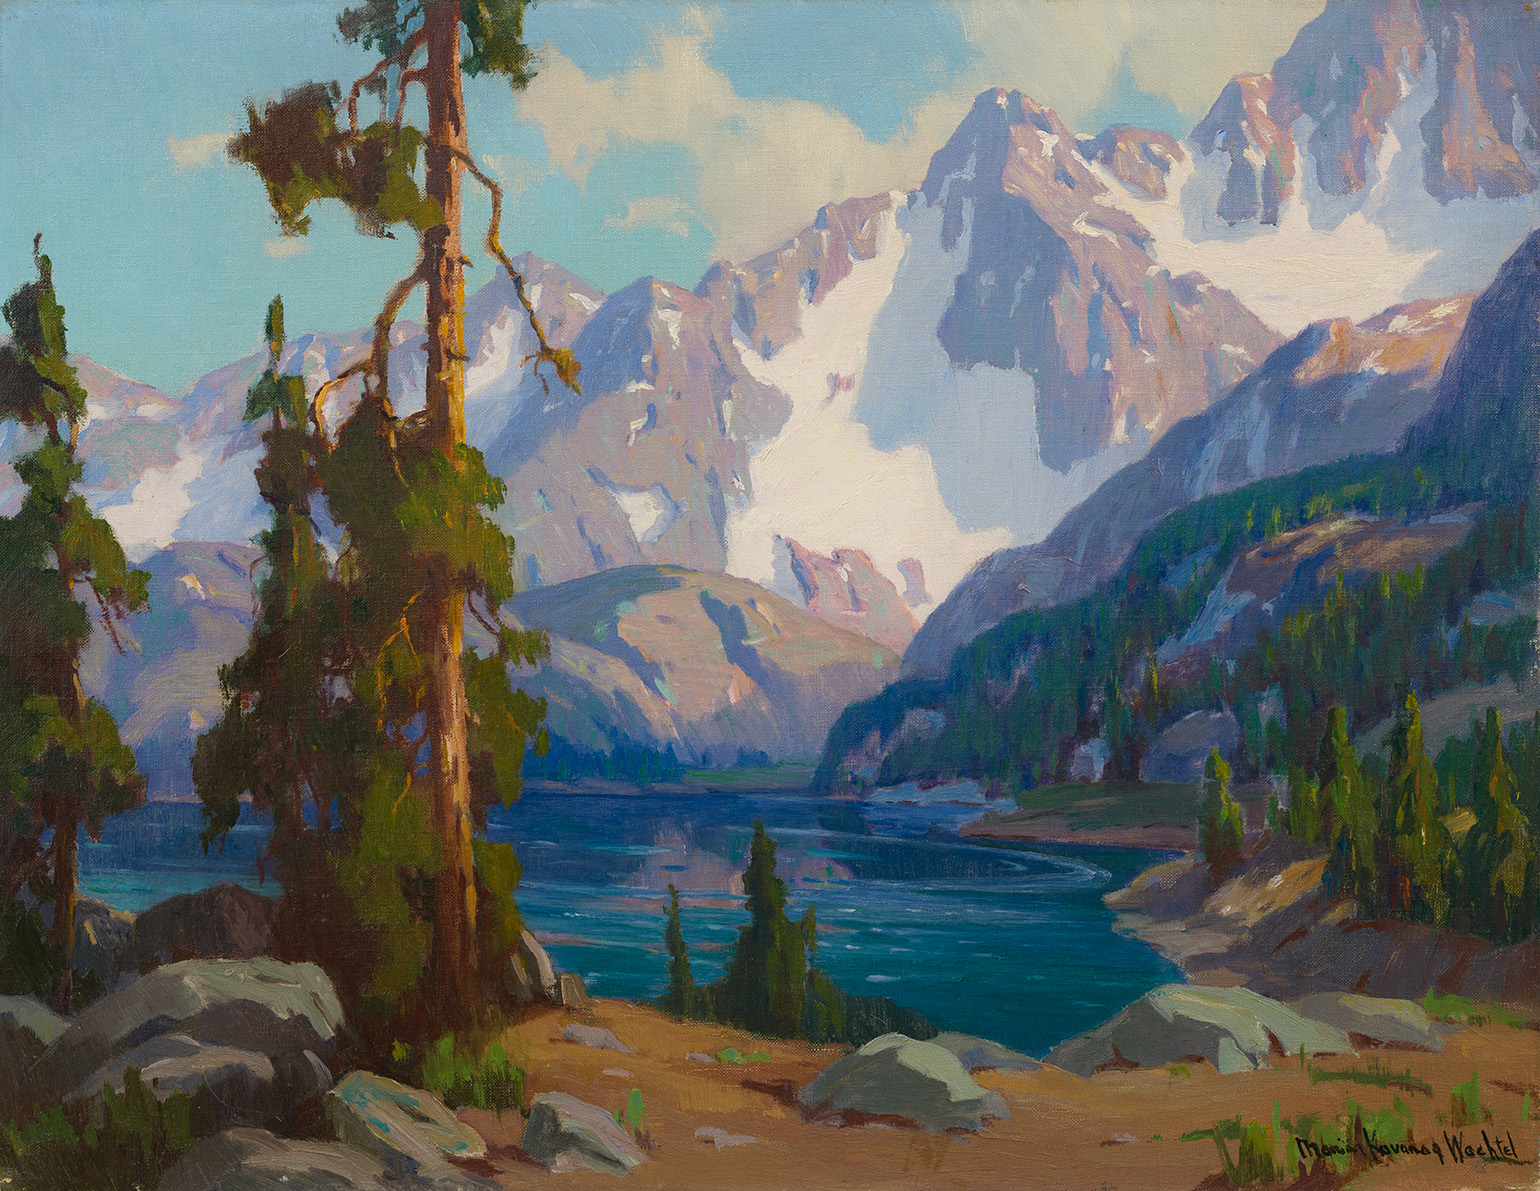 Marion Kavanagh Wachtel, <em>Long Lake, Sierra Nevada</em>, circa 1929, Oil on canvas, 20 x 26 in. UCI Jack and Shanaz Langson Institute and Museum of California Art, Gift of The Irvine Museum